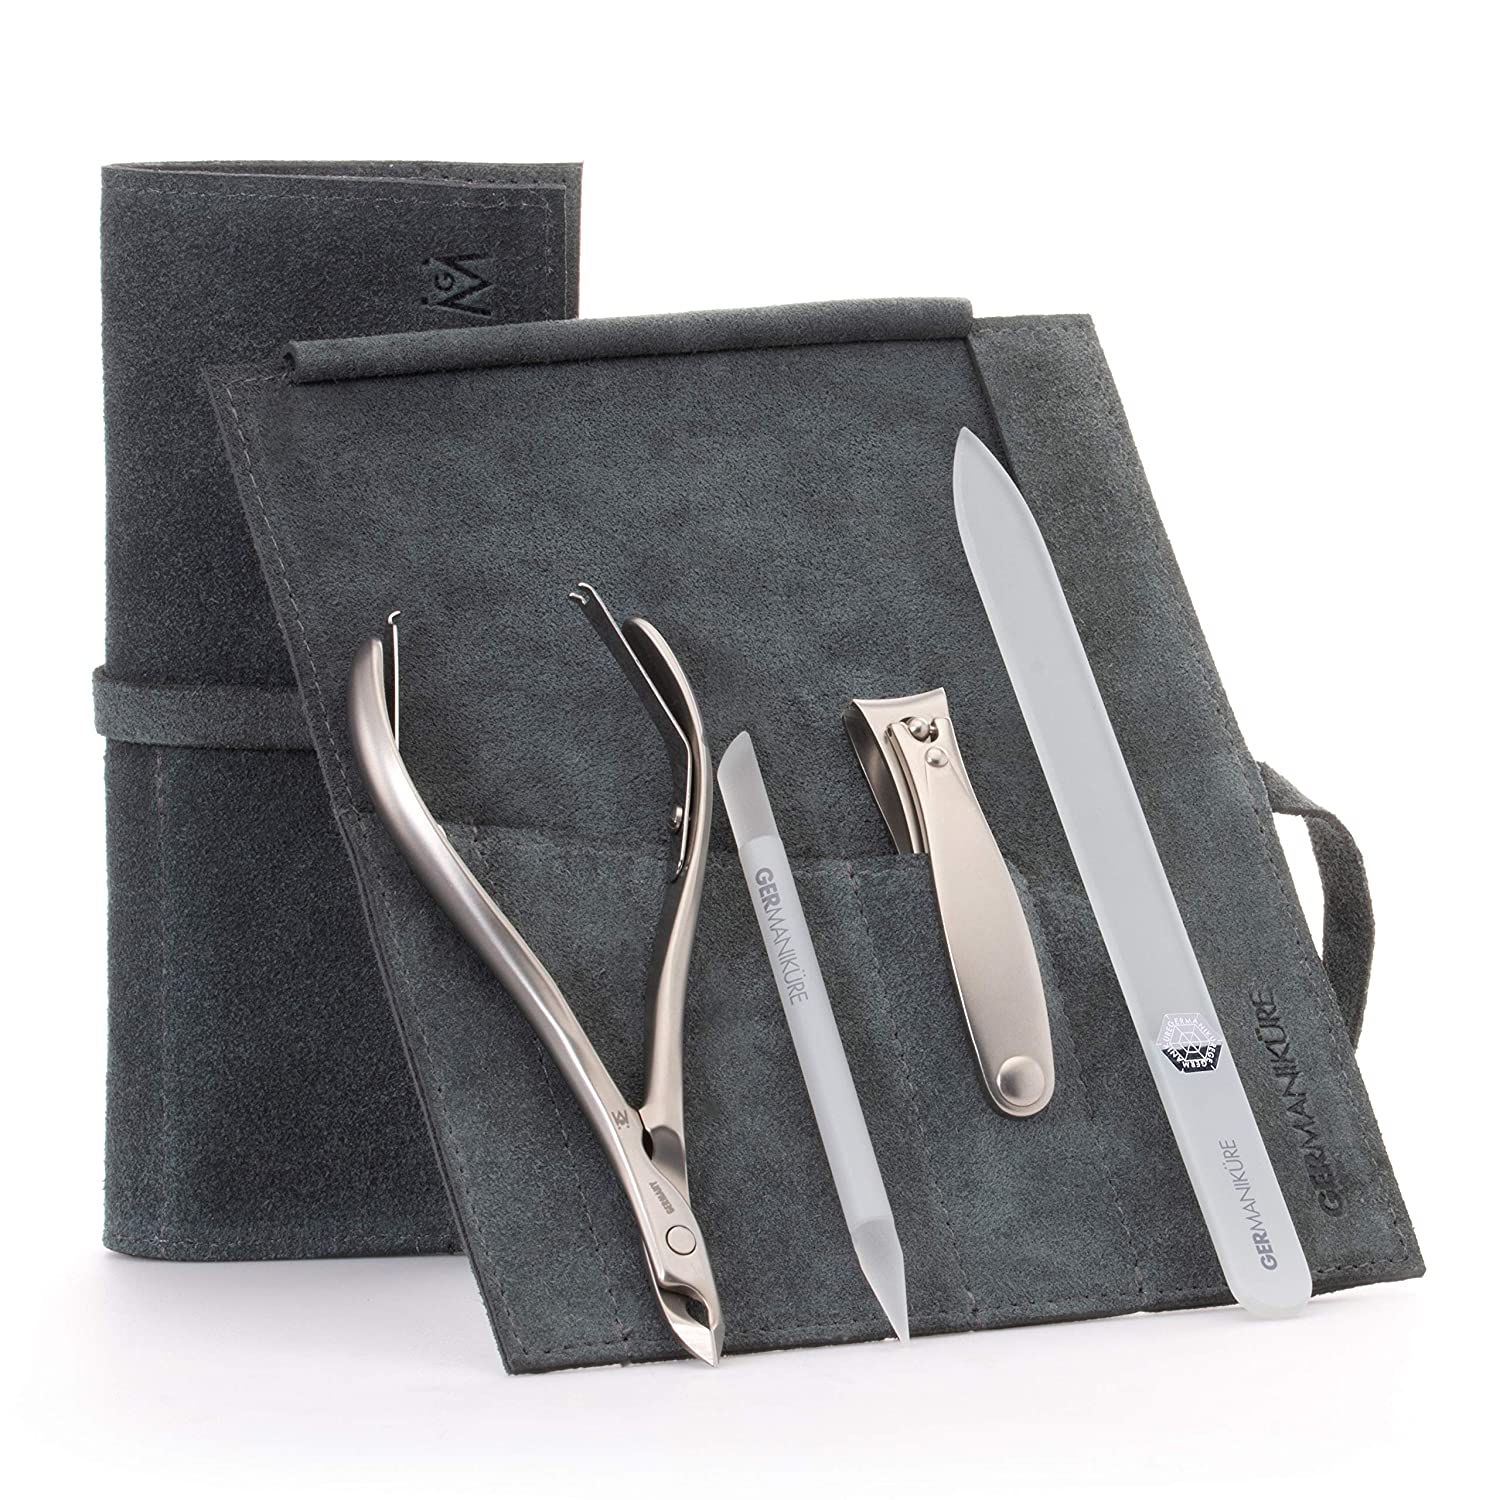 4pc Manicure Set with Cuticle Nipper in Suede Roll